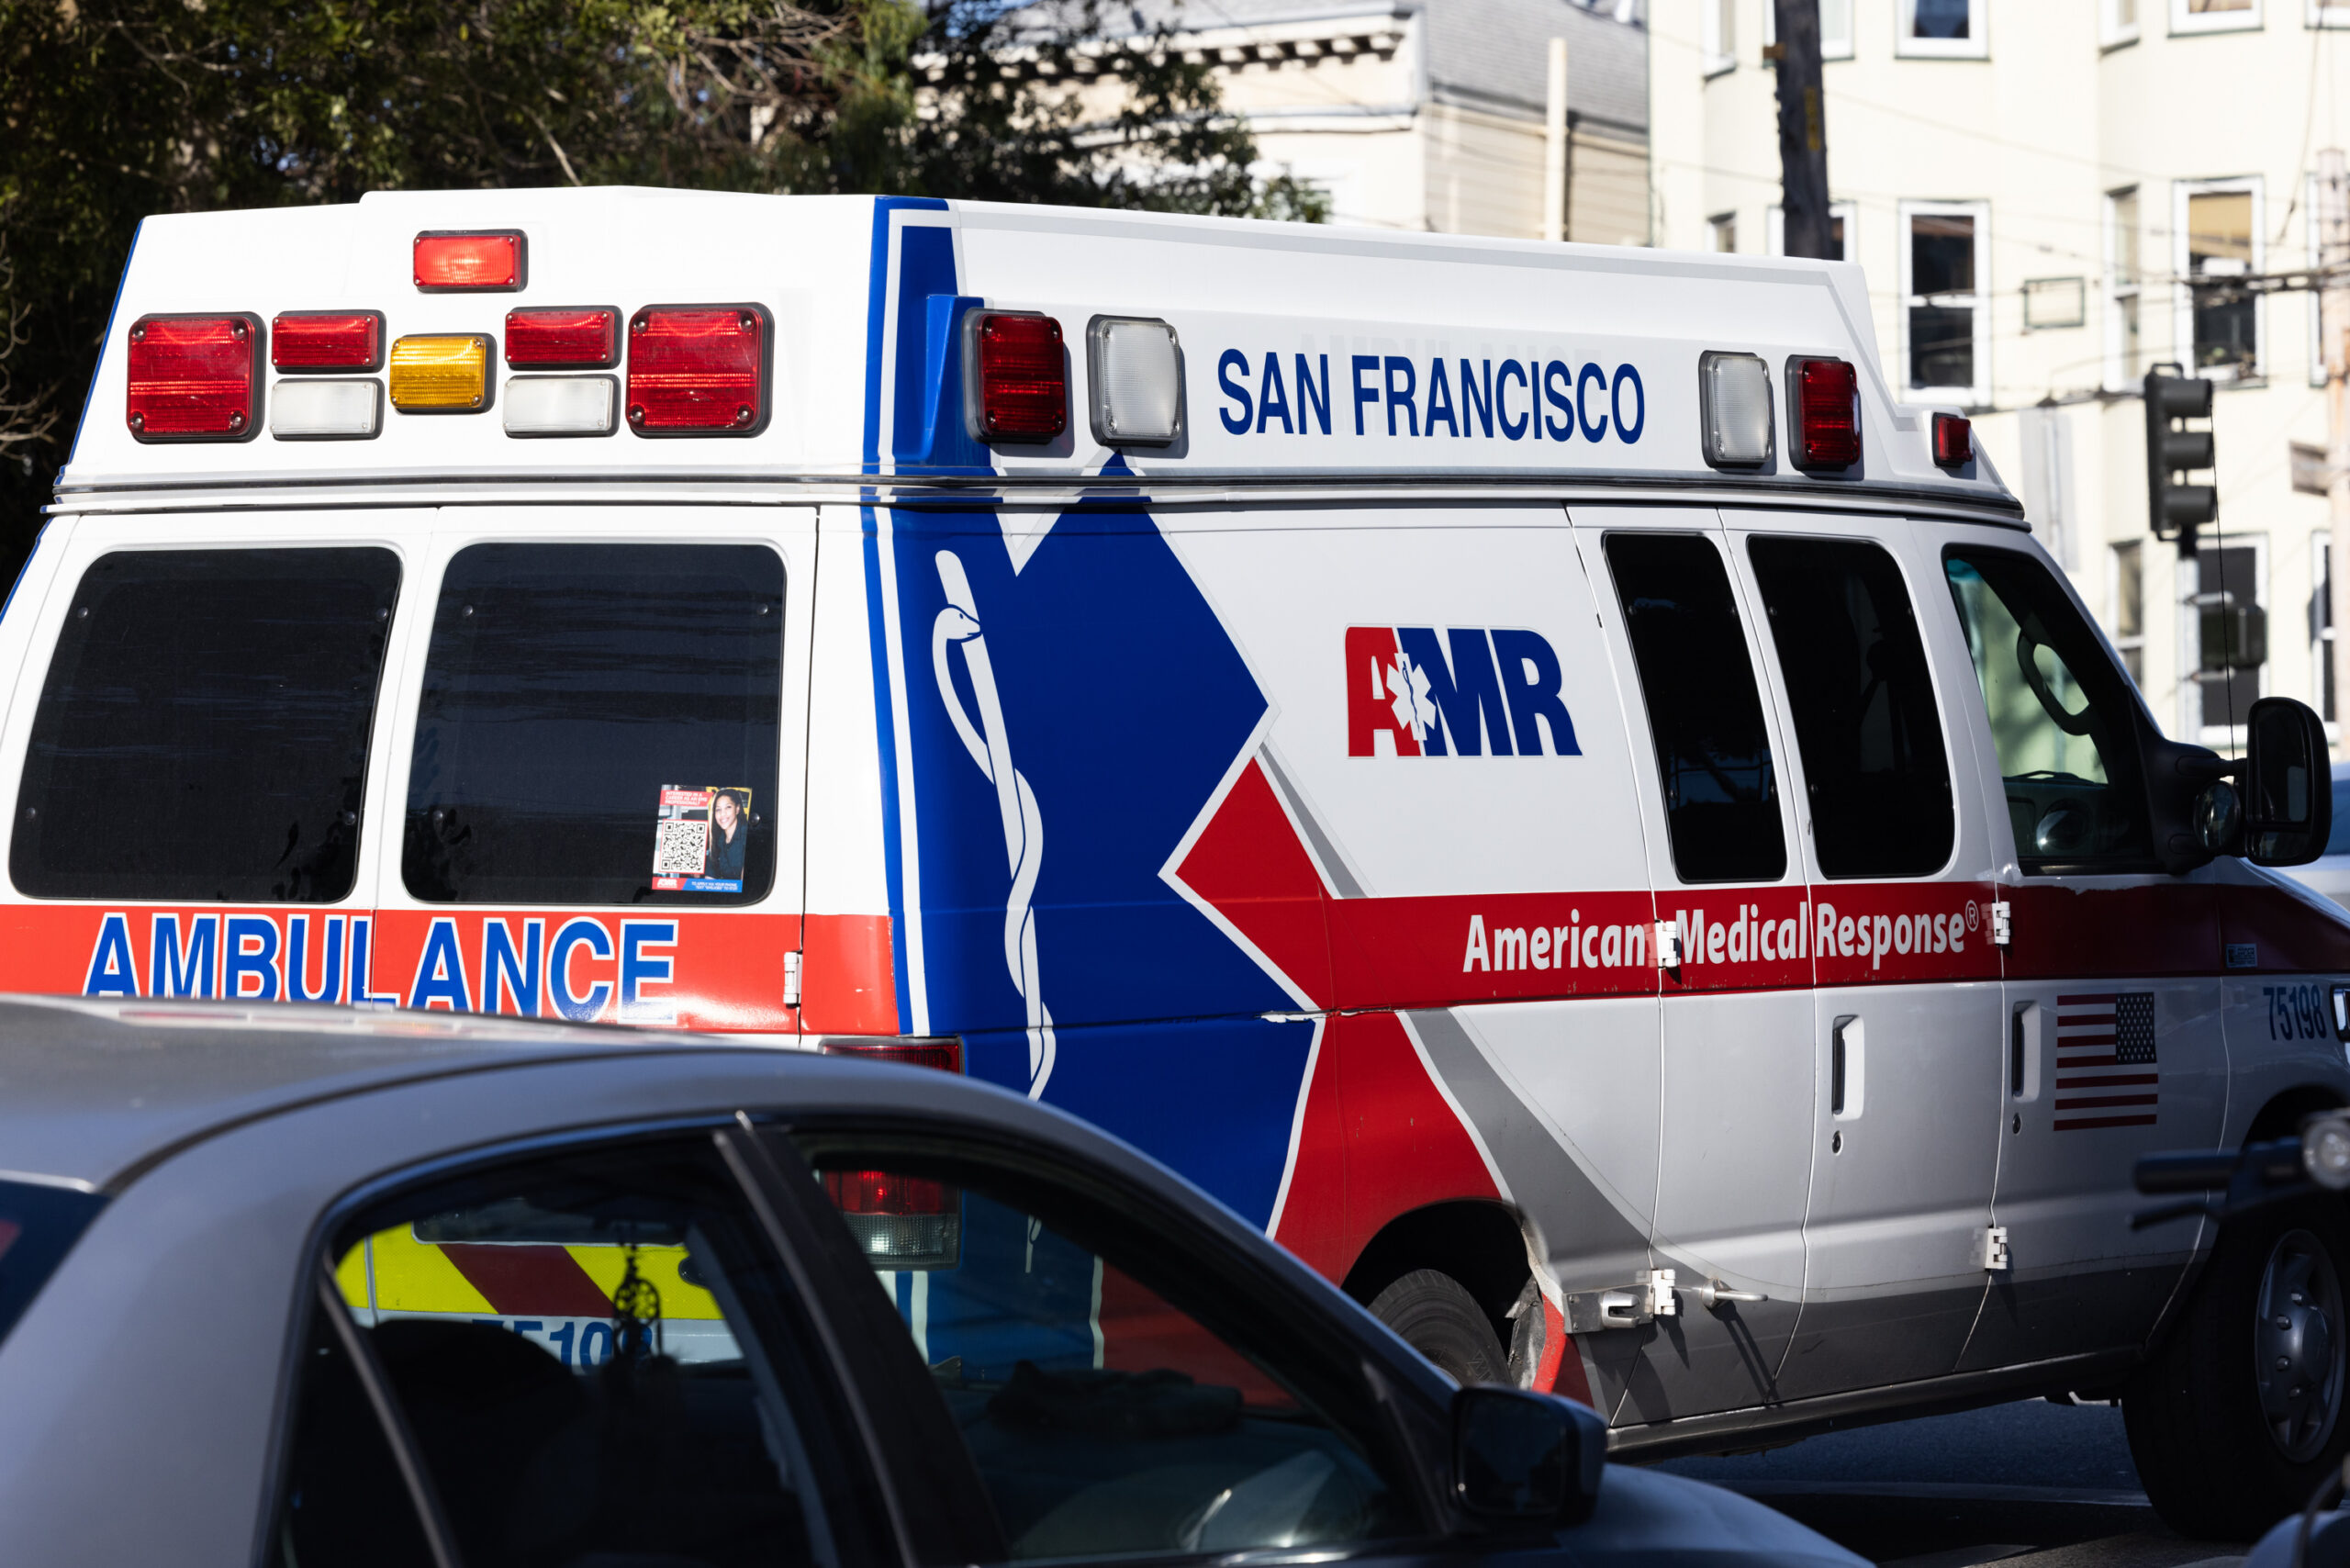 A white ambulance with blue and red markings passes hospital building